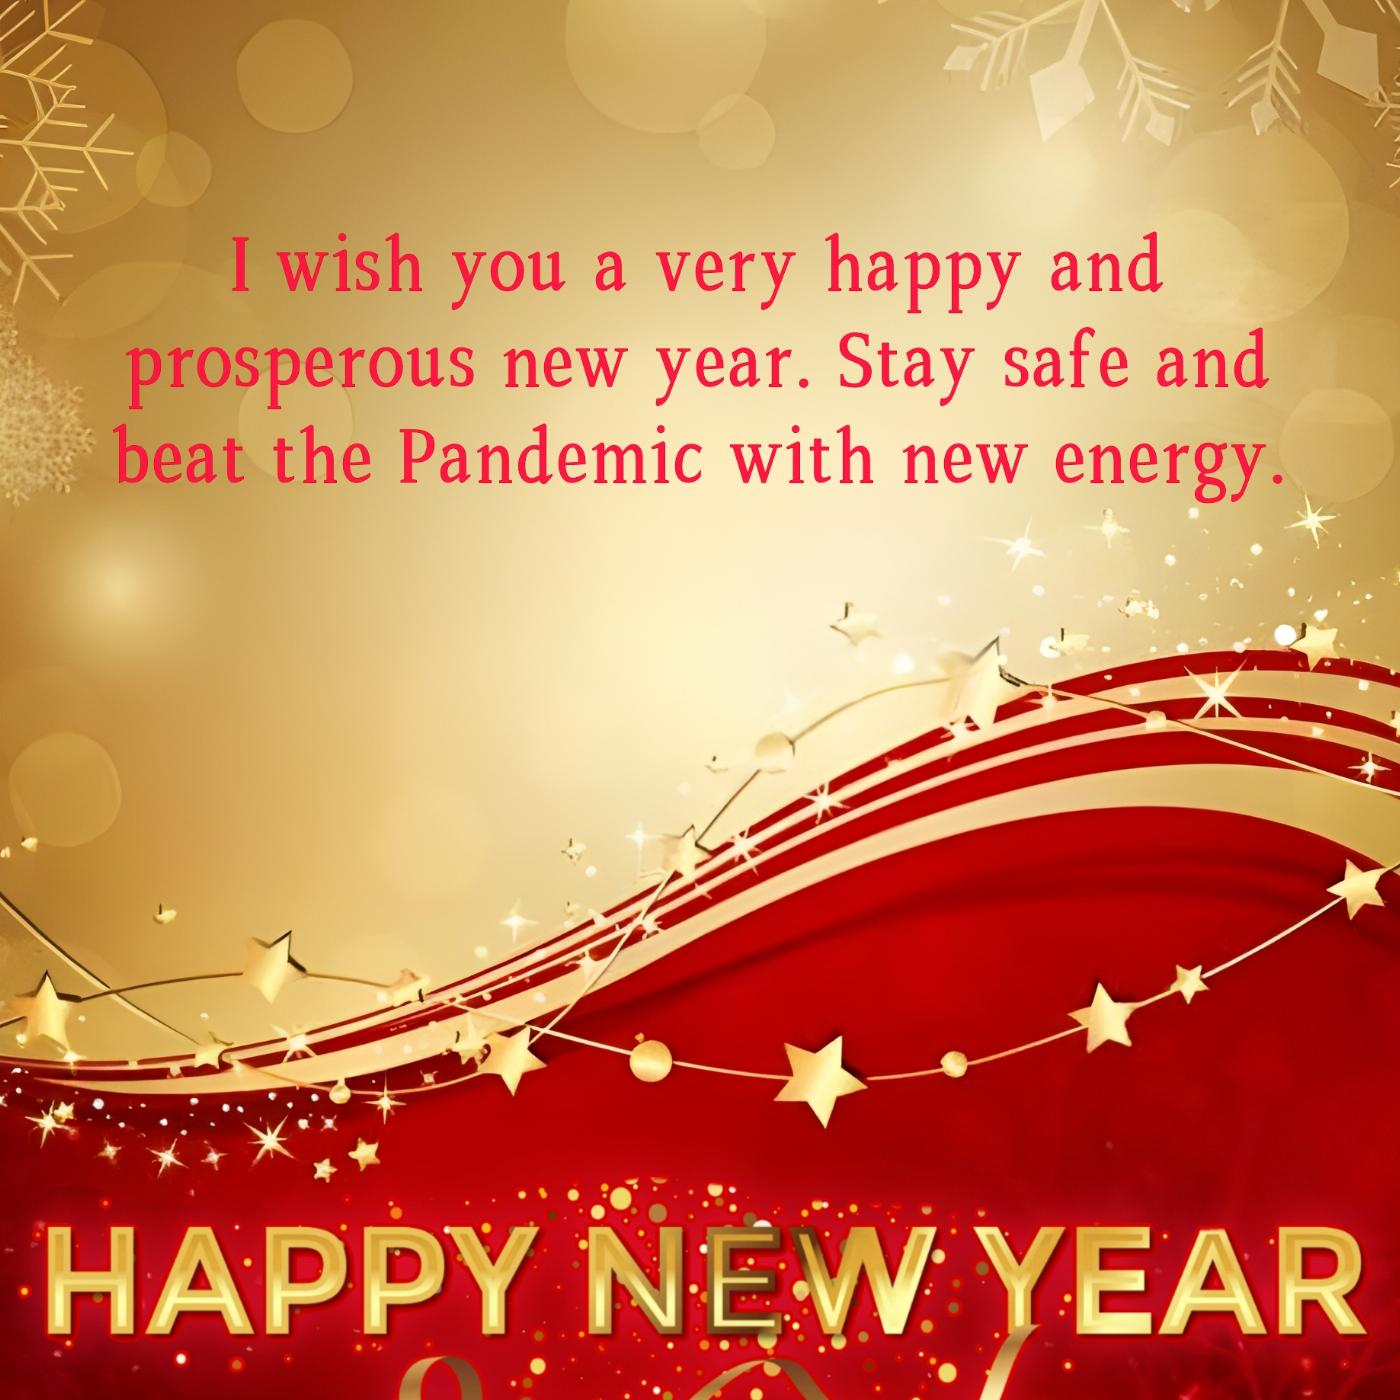 I wish you a very happy and prosperous new year